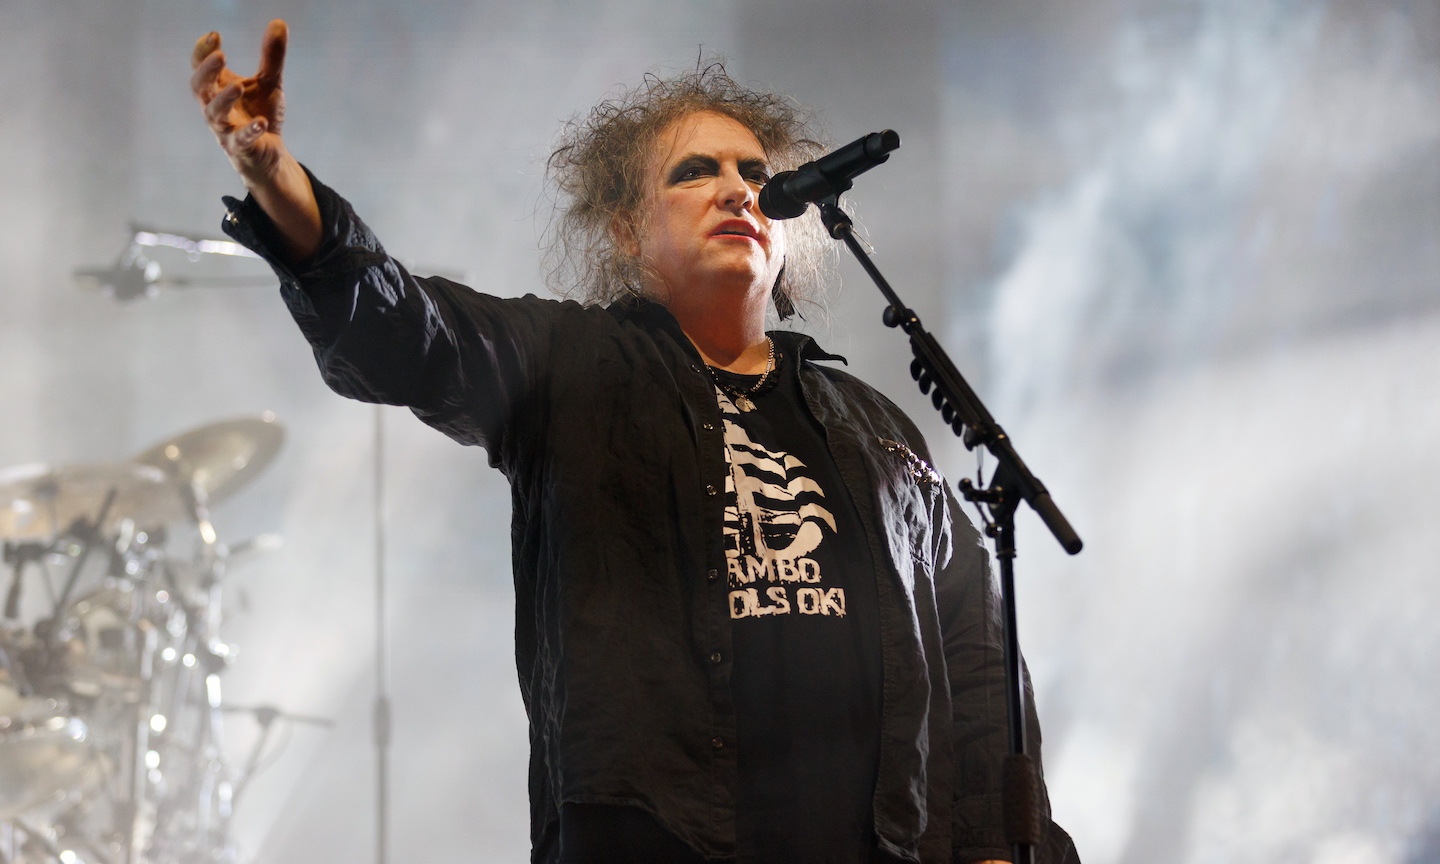 The Cure 2023 arena concert tour: Get tickets, dates & prices